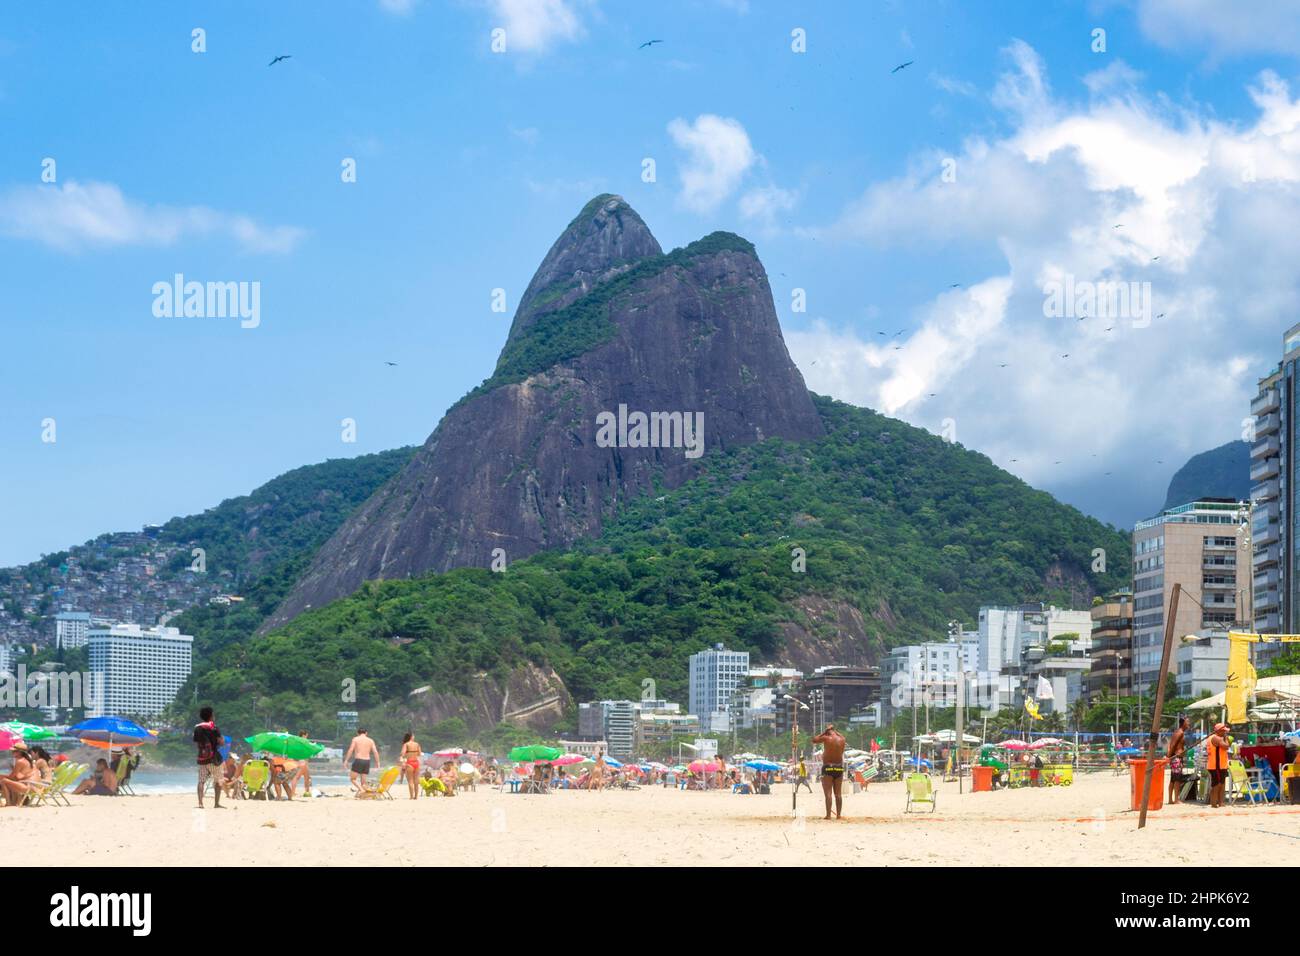 The Two Brothers Mountain seen from the sand where tourists are enjoying the Summer. Ipanema Beach is a famous place and a major travel destination in Stock Photo